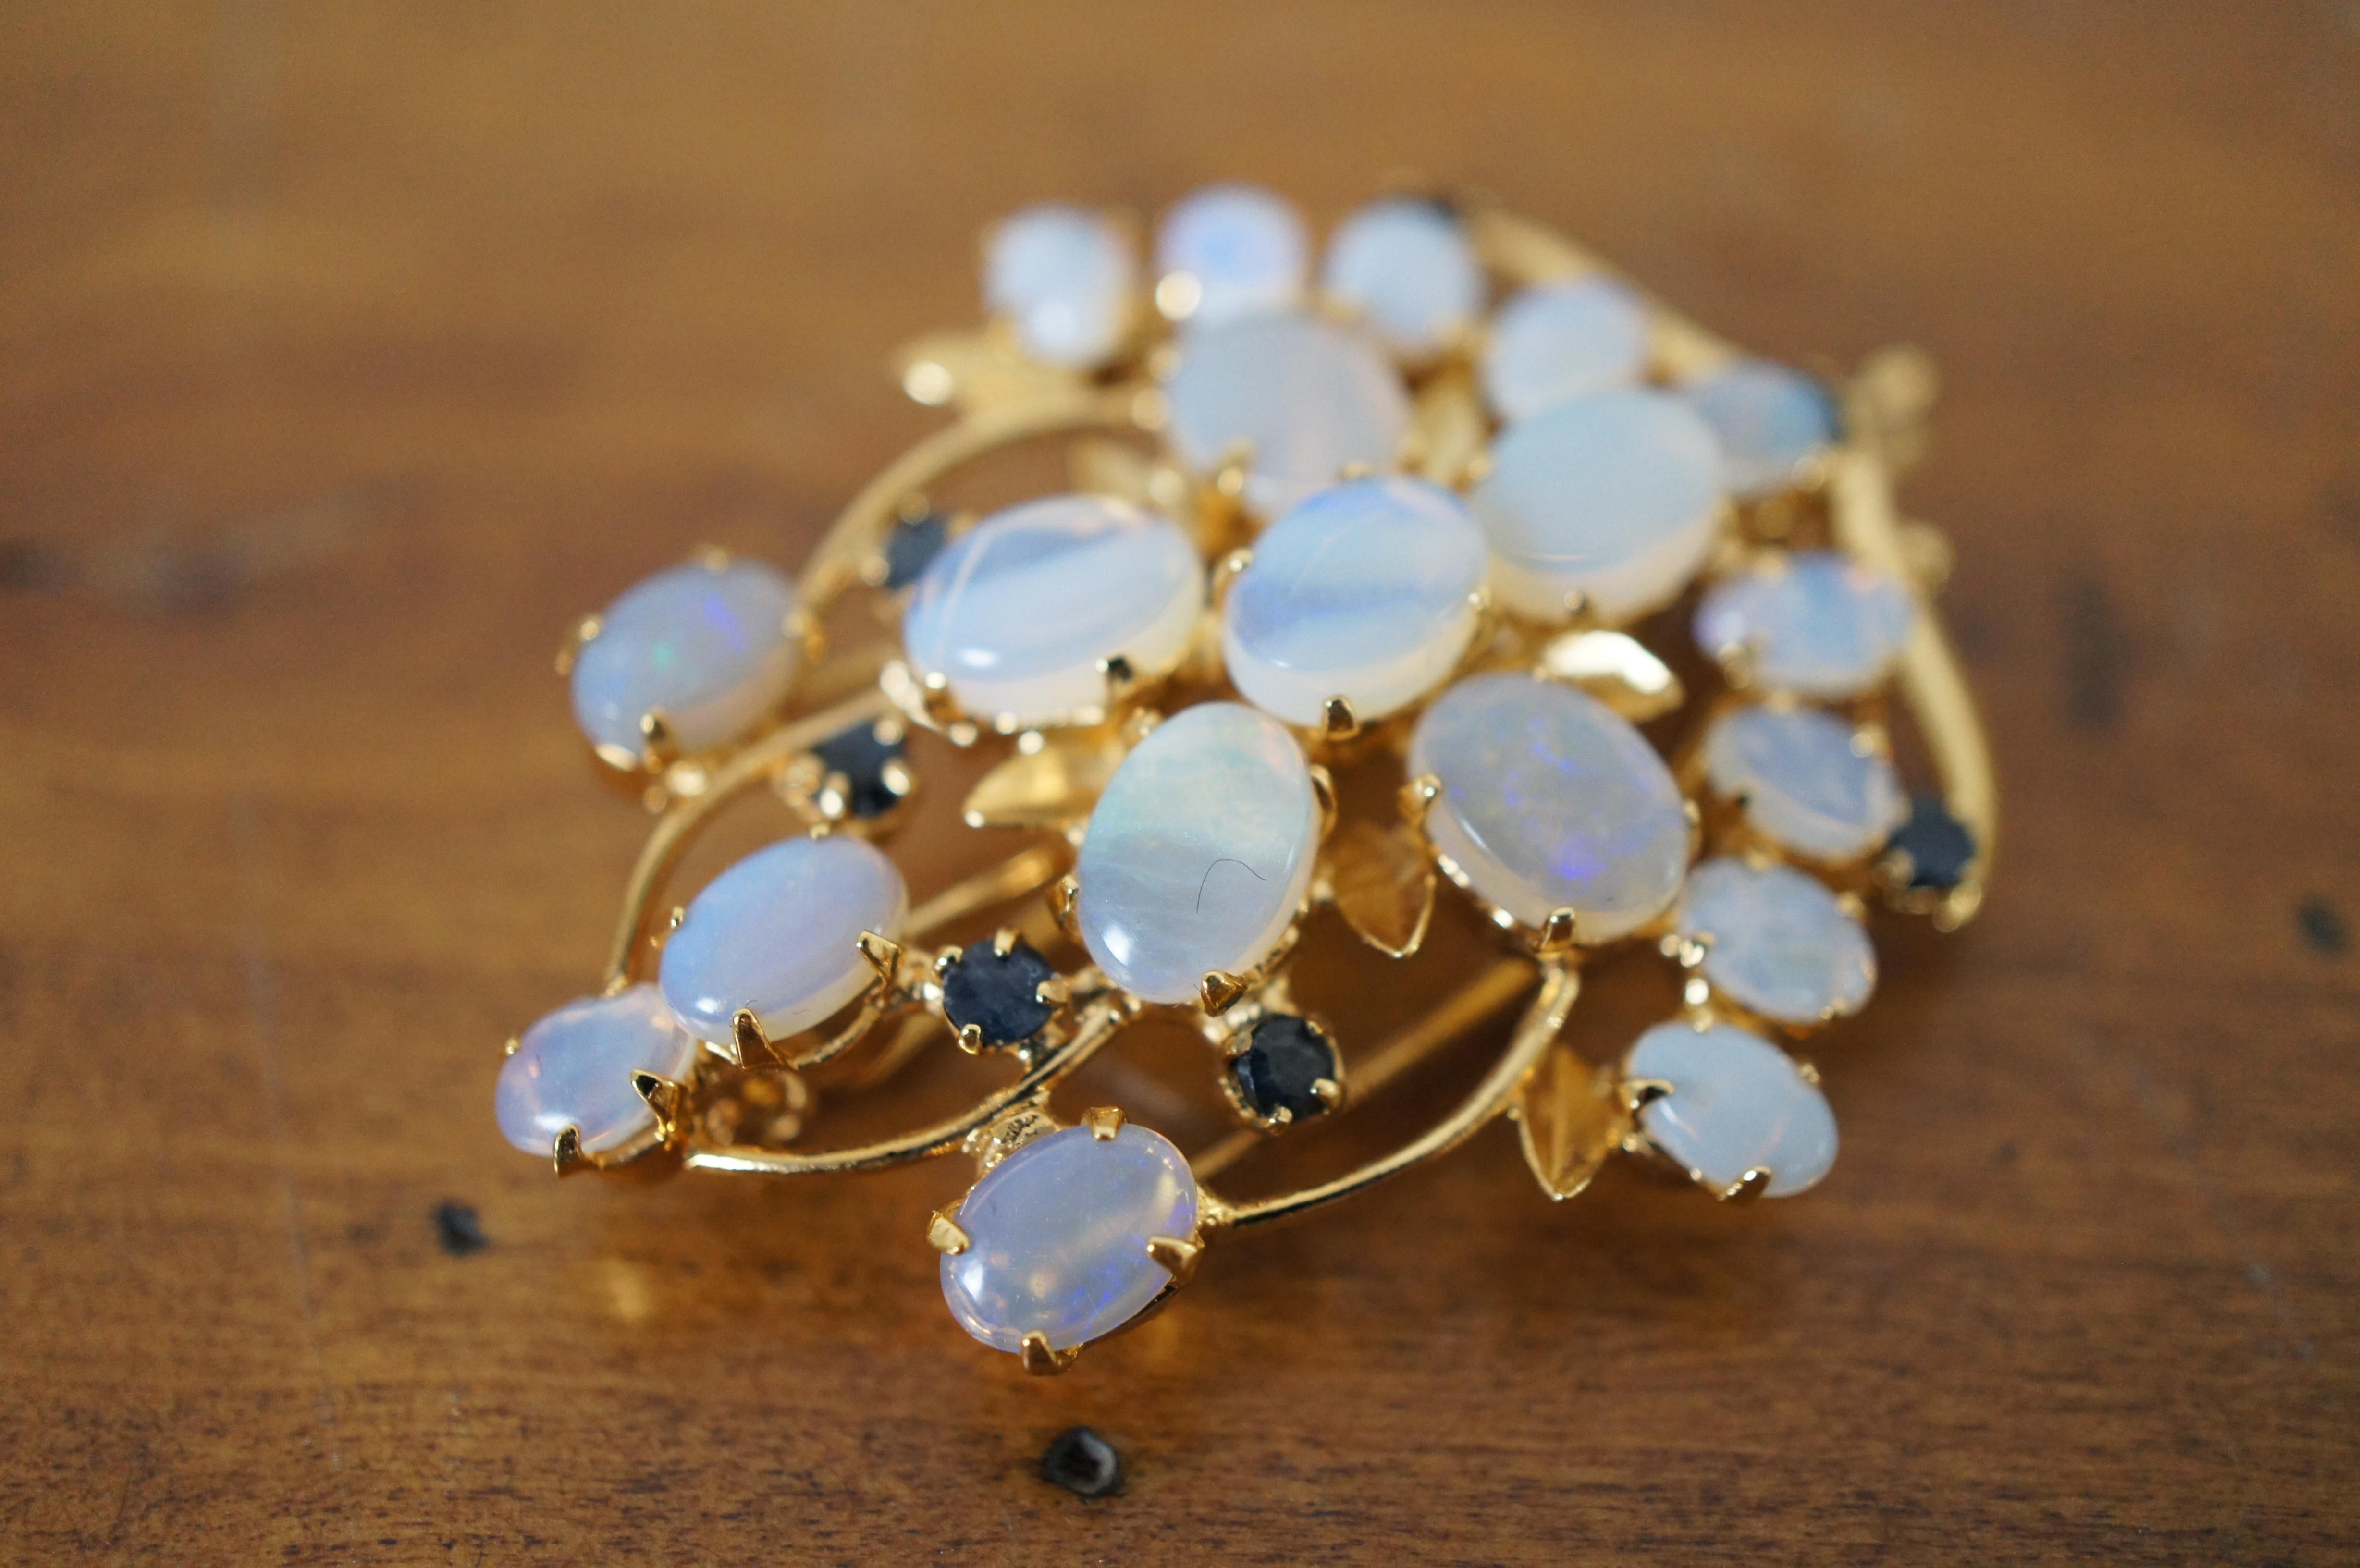 2 Midcentury Gold Tone Opal & Sapphire Floral Cluster Brooch Pendant Pins 2